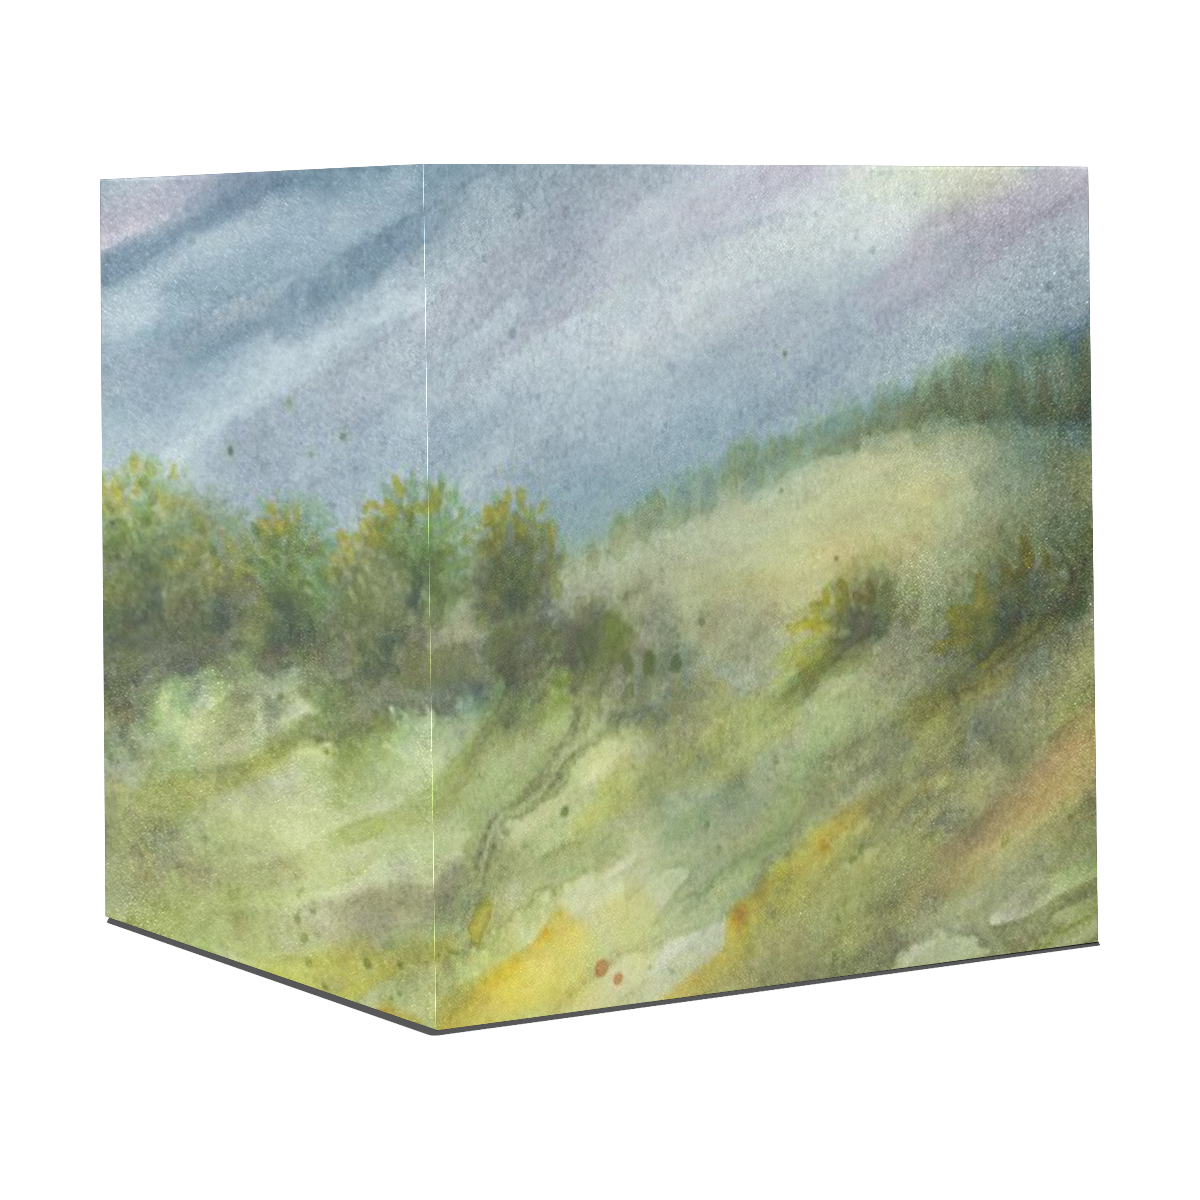 Jewell Landscape - Precious Stones Watercolors Gift Wrapping Paper 58"x 23" (1 Roll)